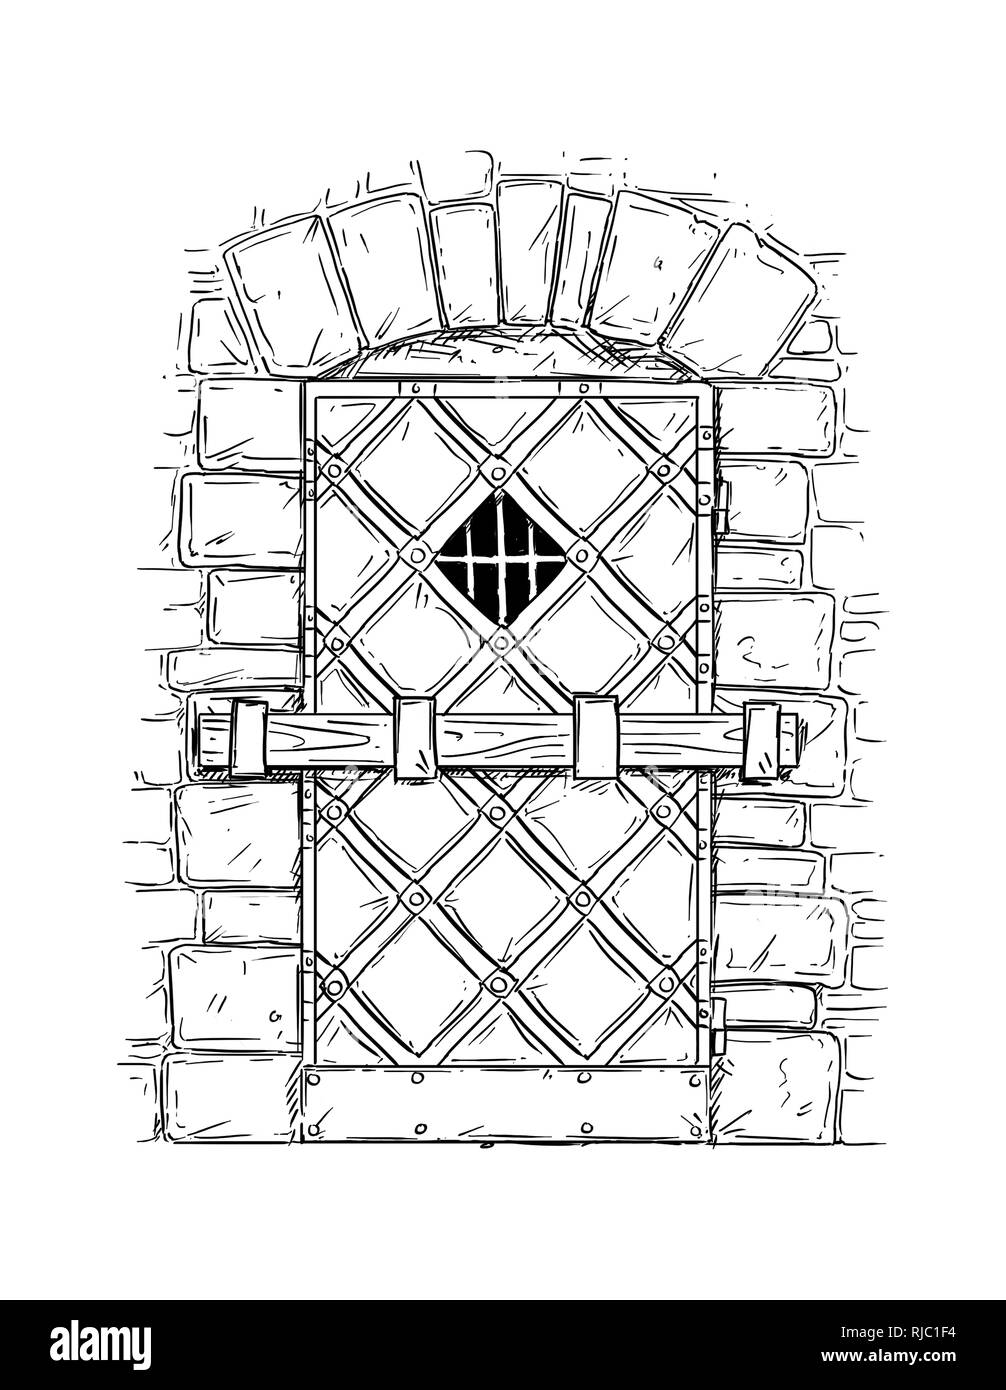 Cartoon Drawing of Wooden Medieval Door Closed by Latch Stock Photo